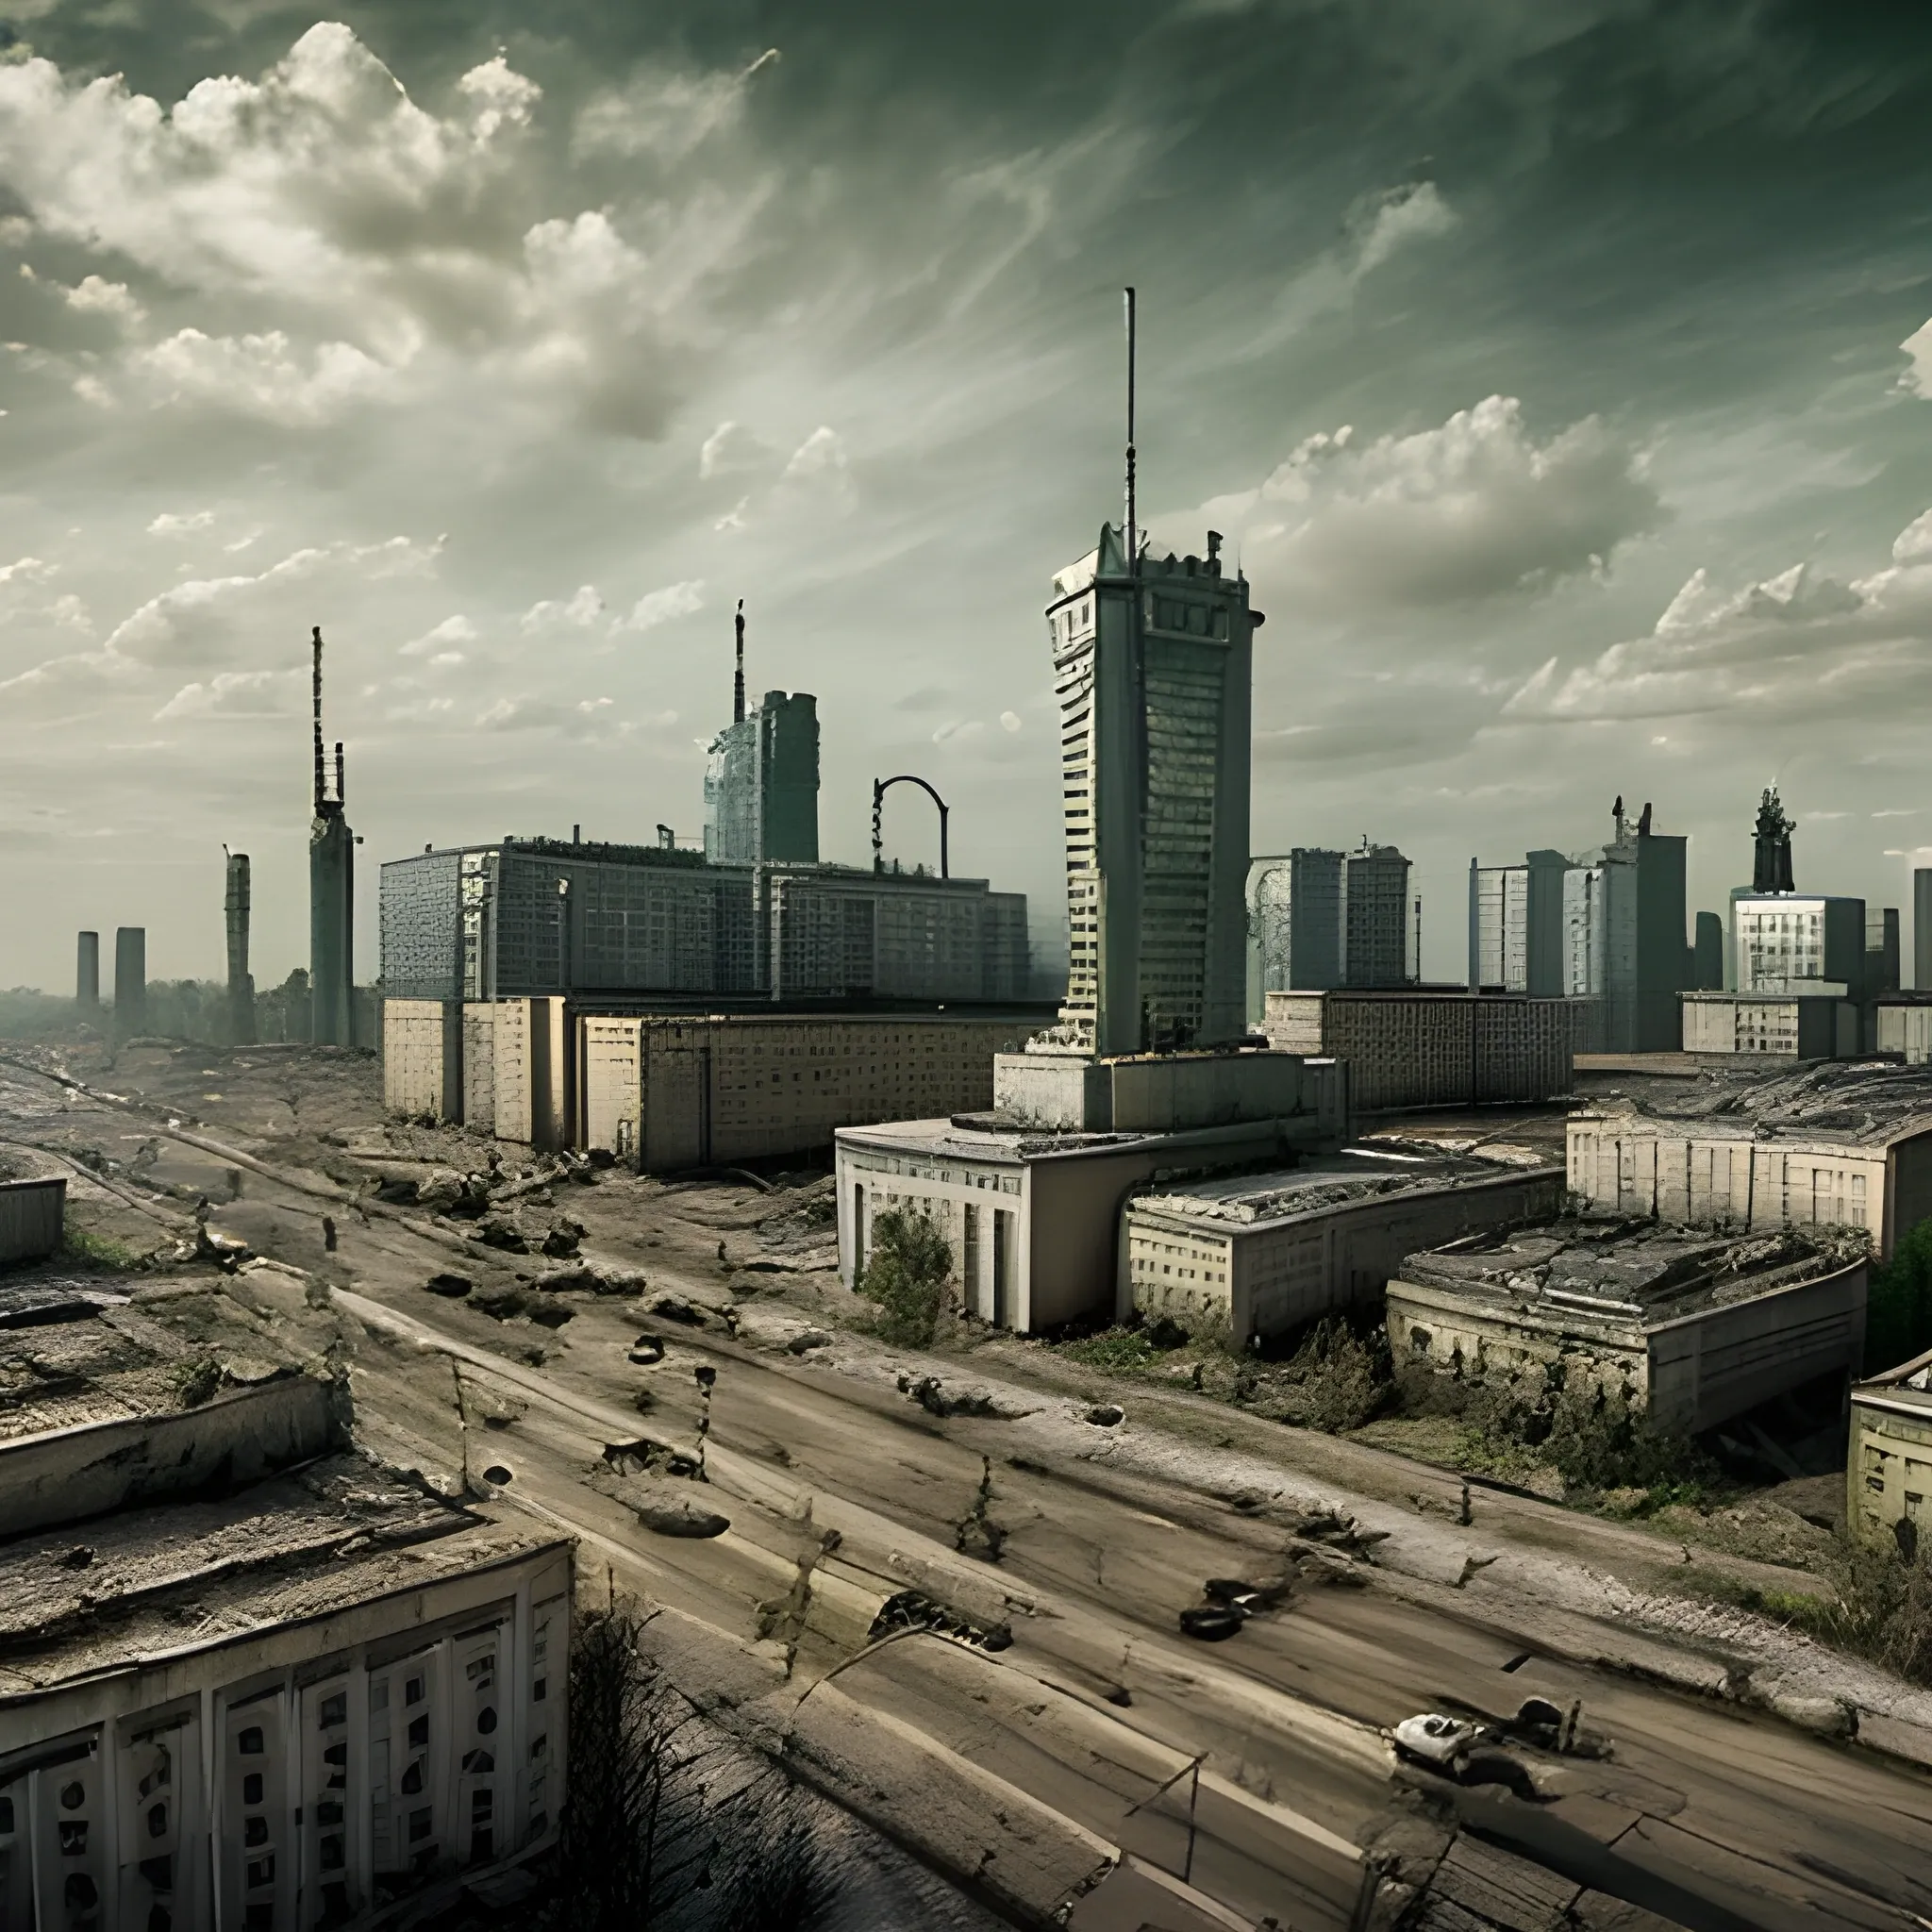 The post-apocalyptic city of Minsk, the main gateway to the city, in a cinematic style